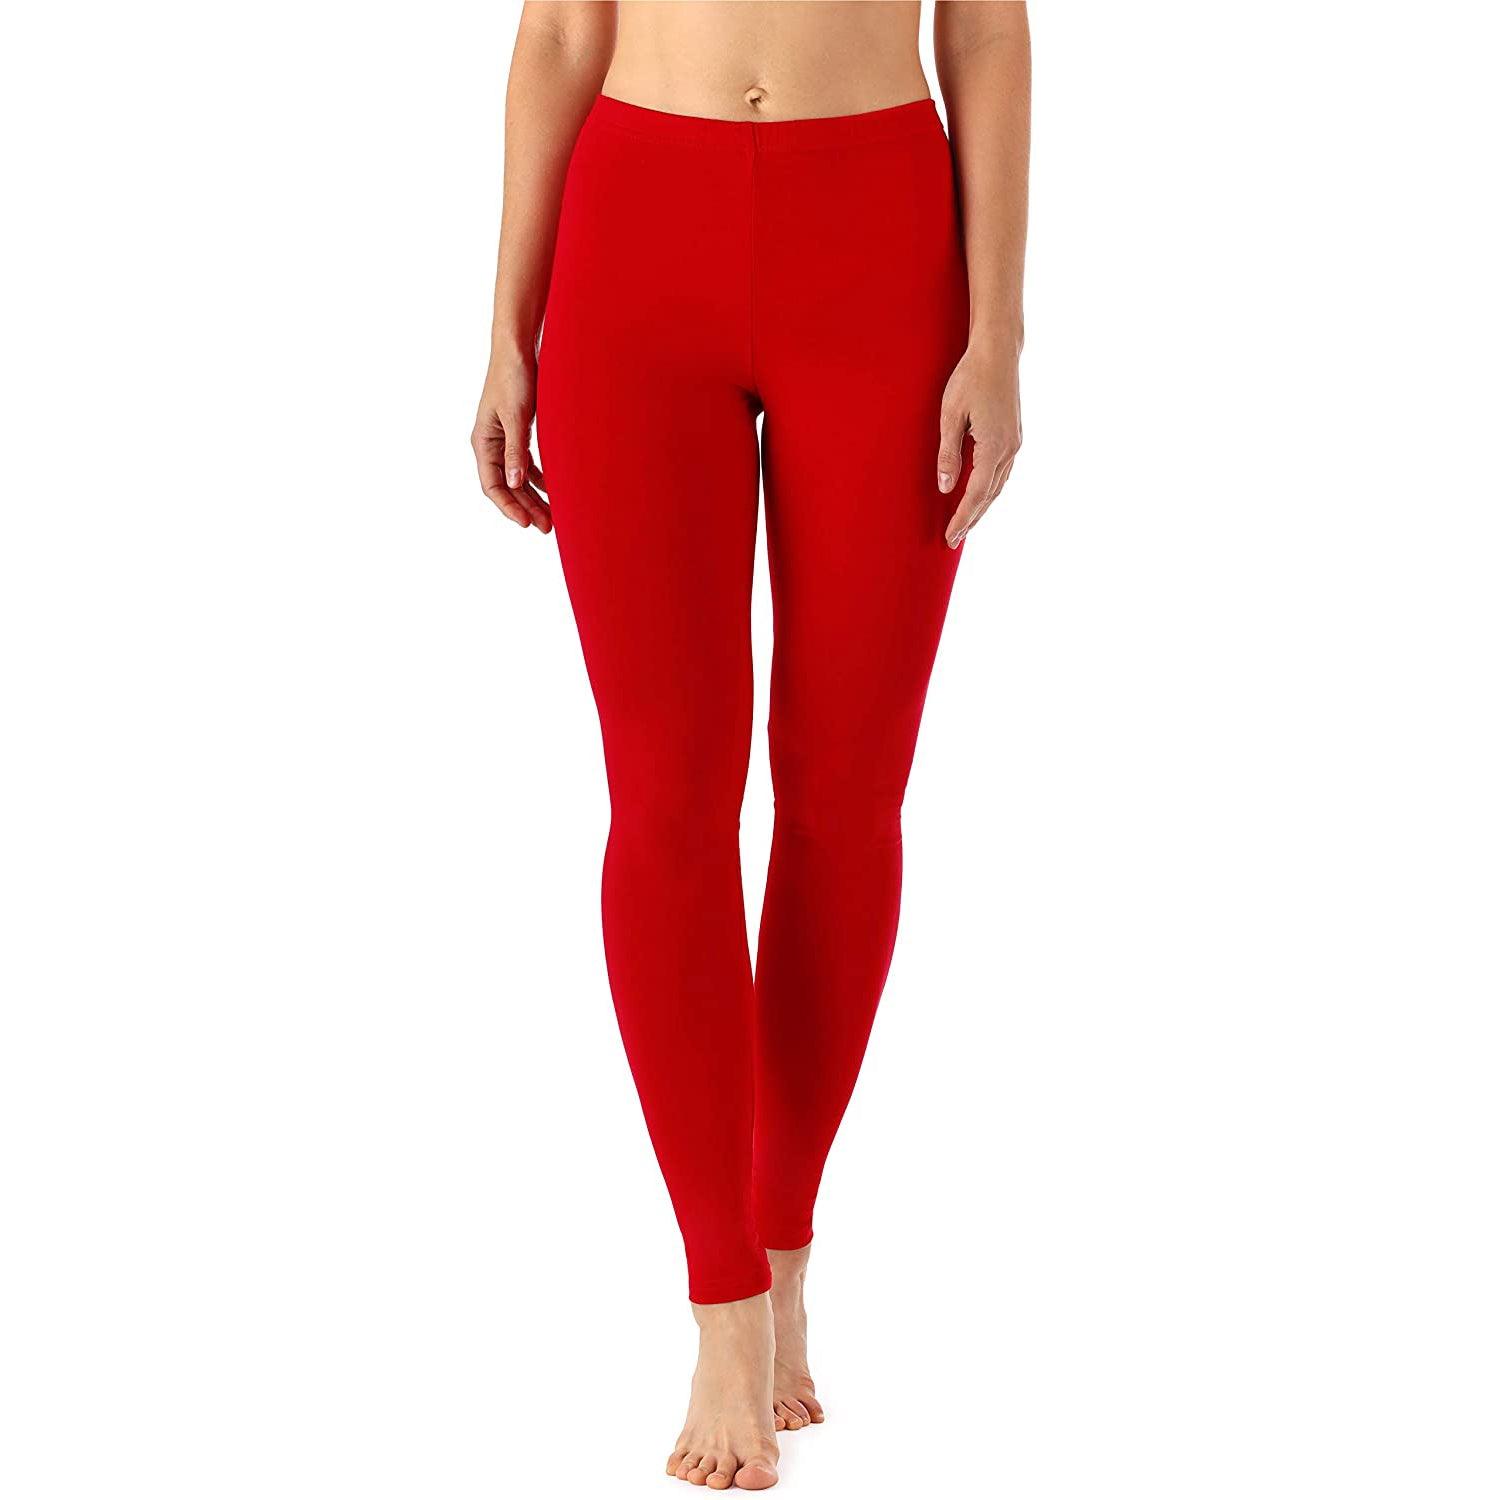 http://www.walgrow.com/cdn/shop/products/zindwear-women-s-cotton-soft-plain-summer-stretchy-ankle-length-leggings-one-size-red-walgrow-com-1.jpg?v=1706758019